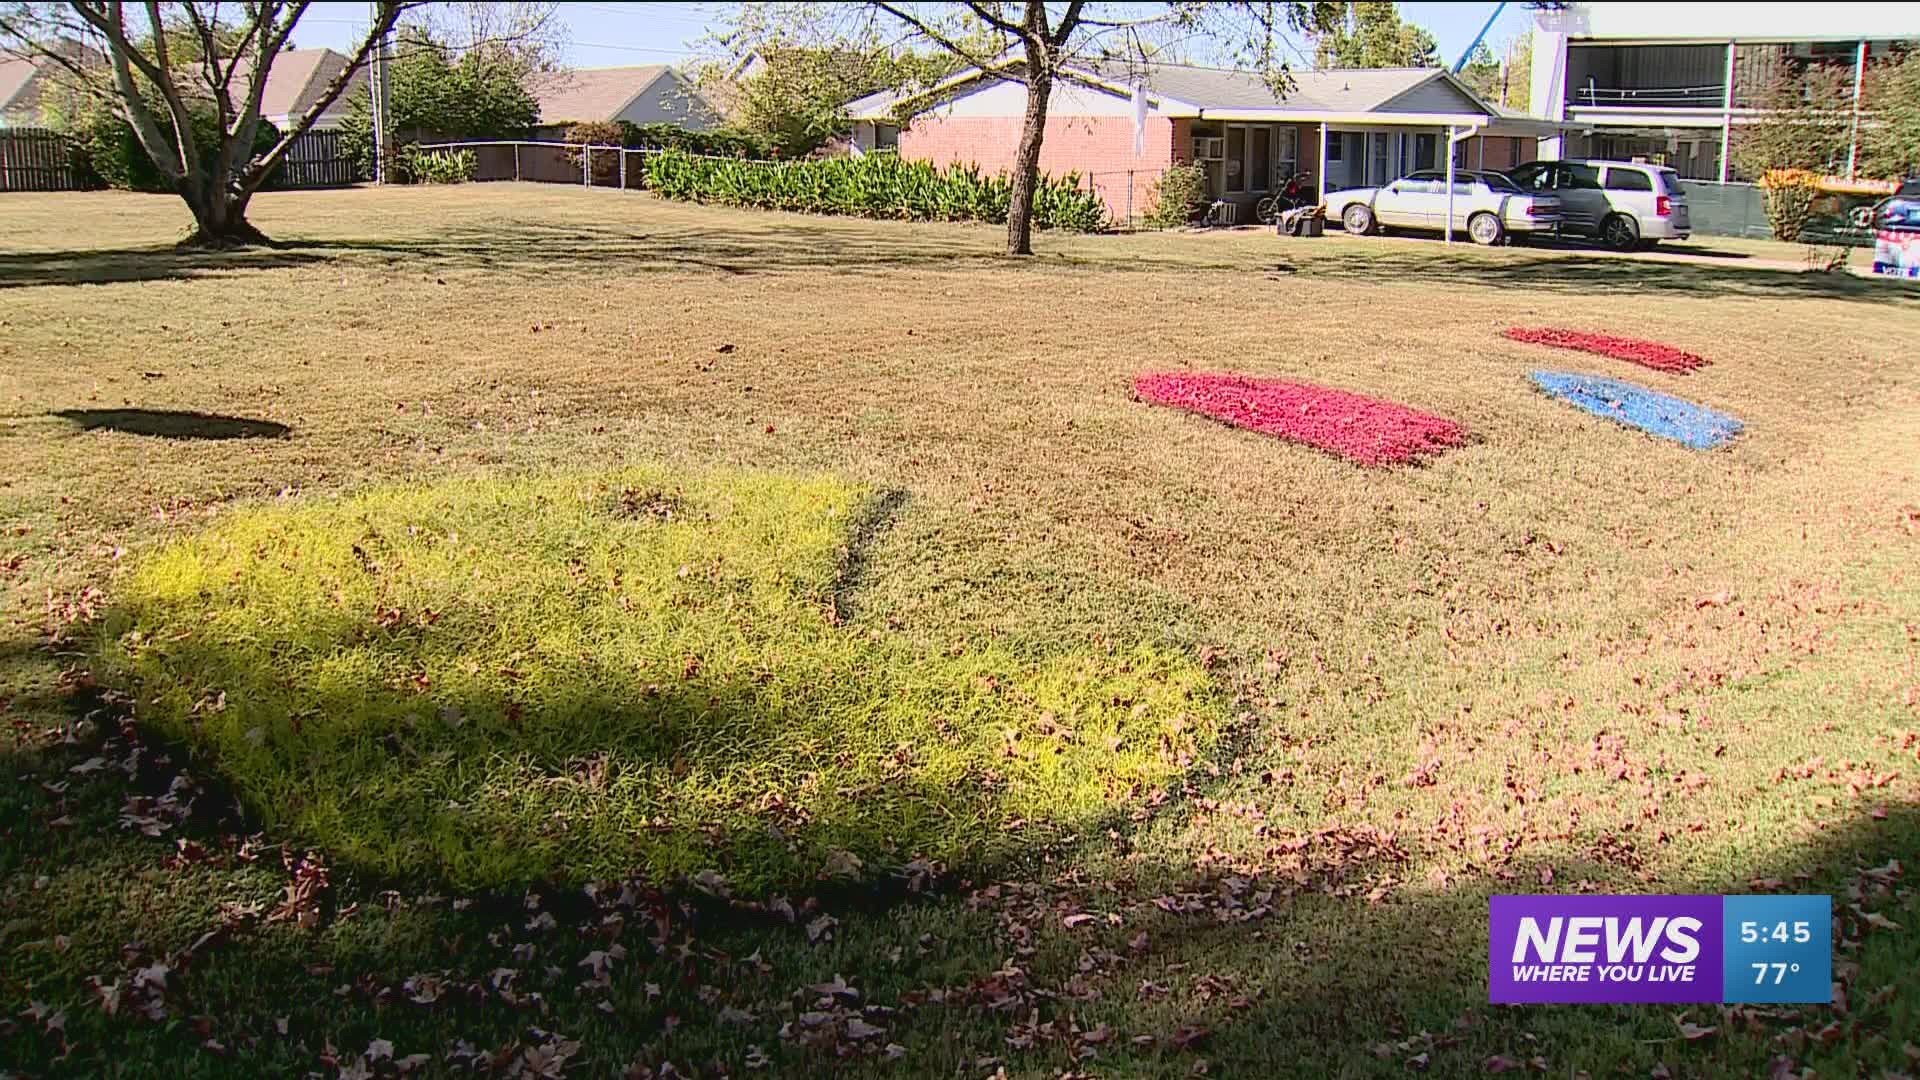 Jay Phillips created a Pac-Man themed artwork at in his yard on Cline Avenue with the help of his 12-year-old son.